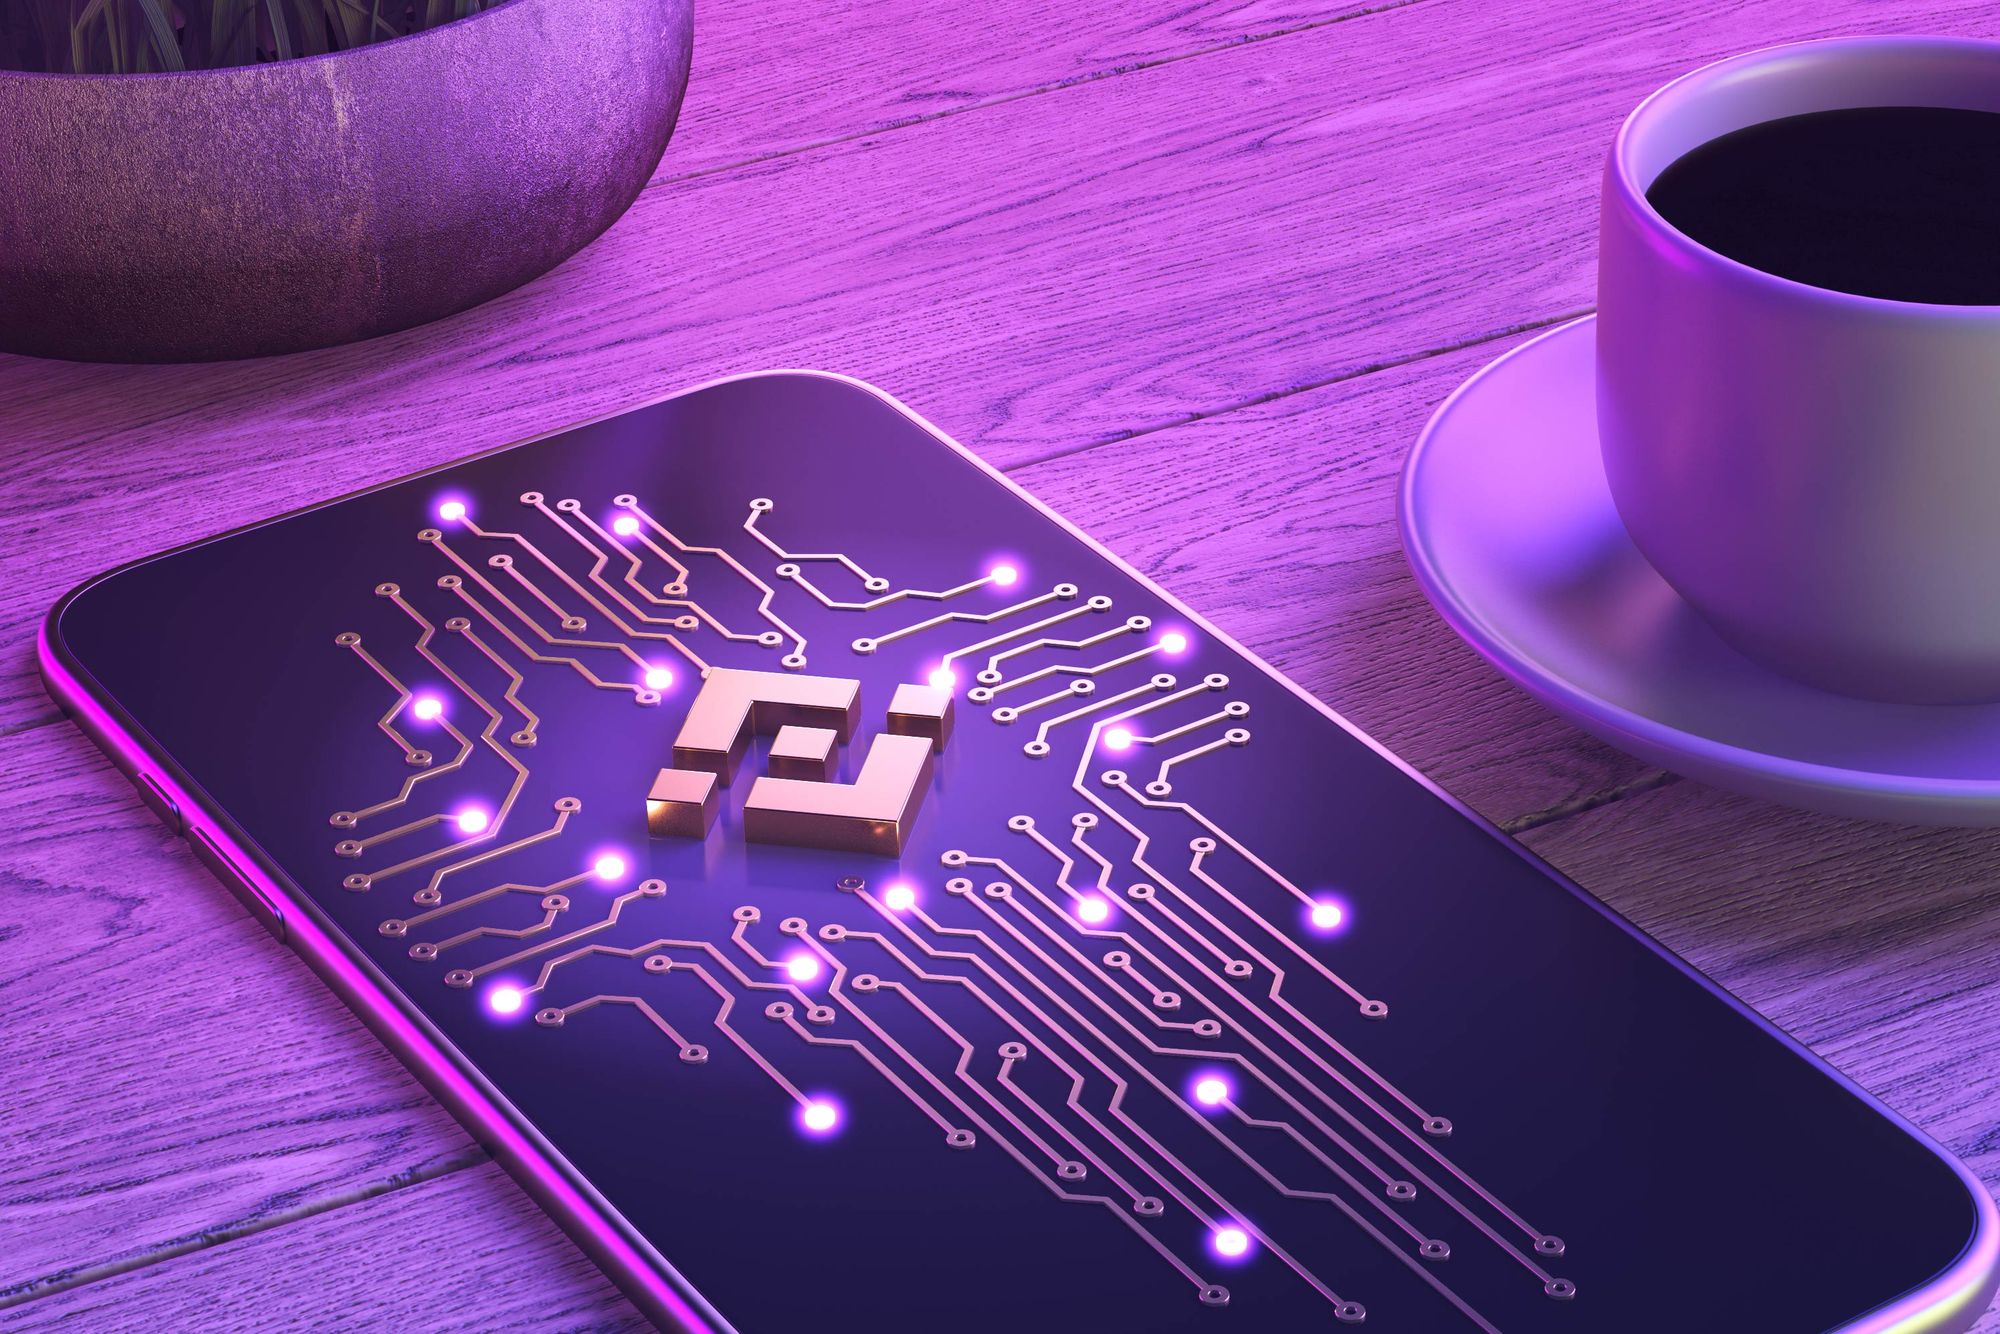 Binance expands Stock Tokens with Microstrategy (MSTR), Apple (AAPL) and Microsoft (MSFT)